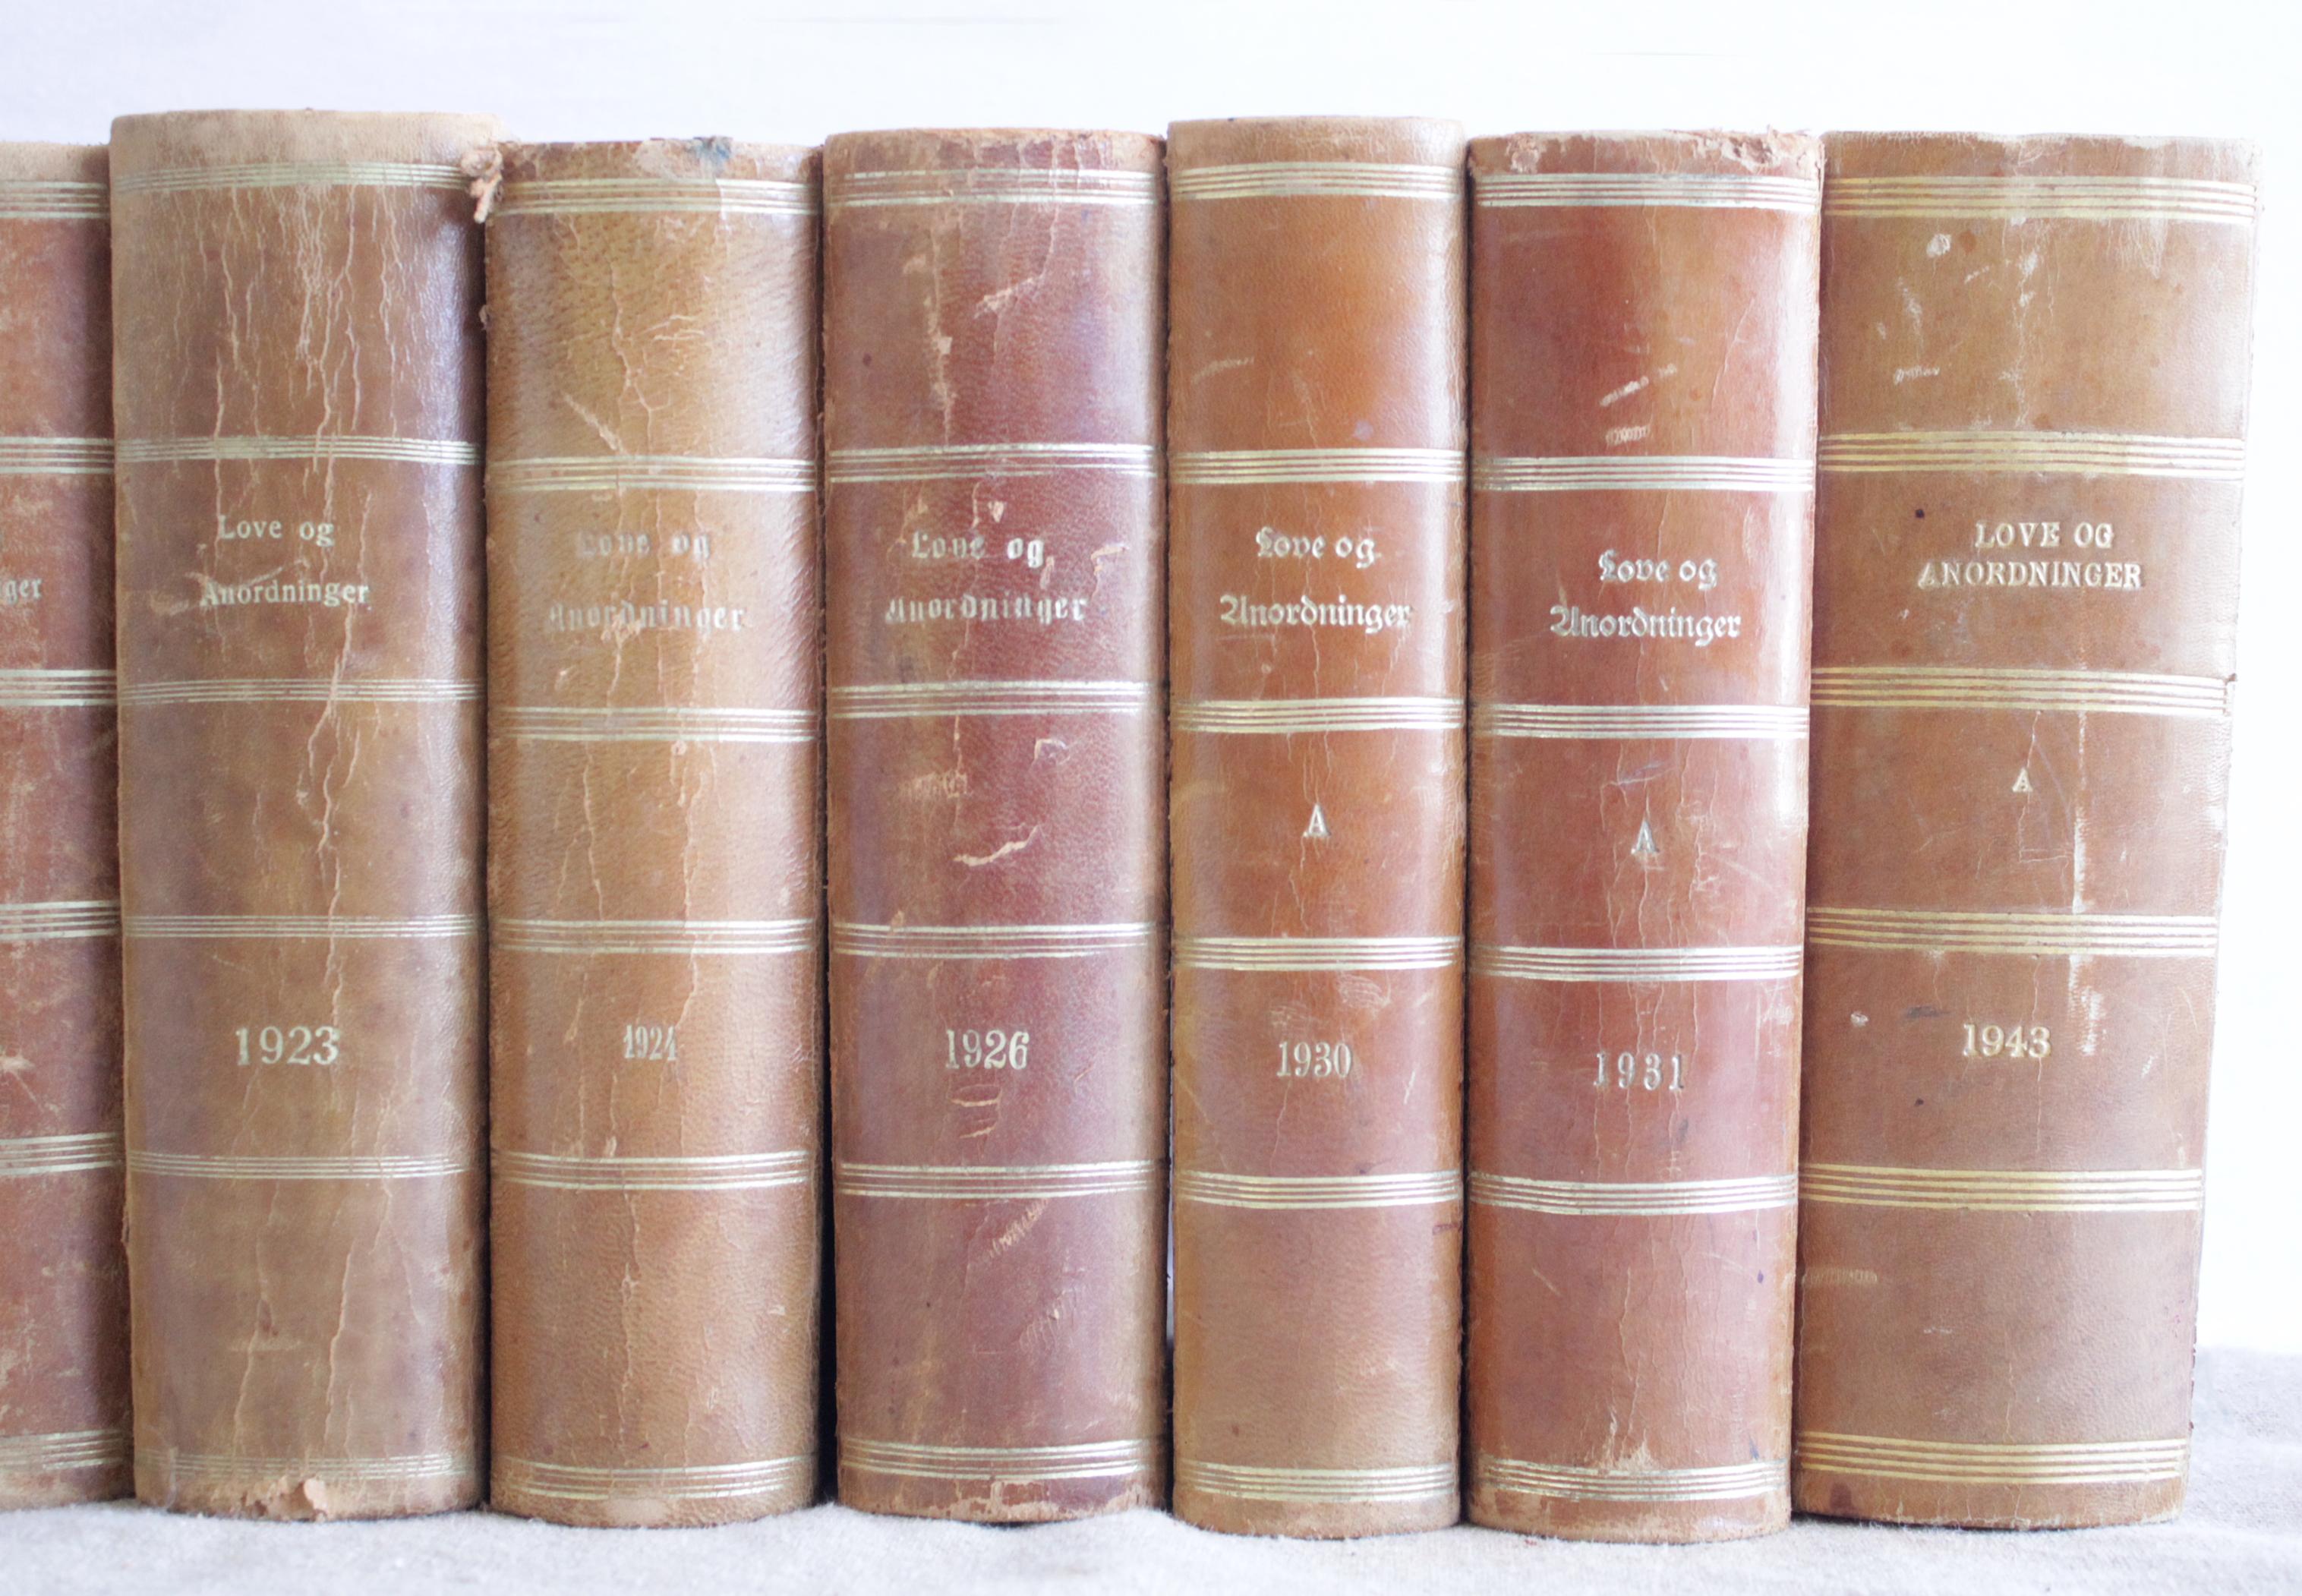 European Set of 10 Antique Leather Bound Love Books from Denmark